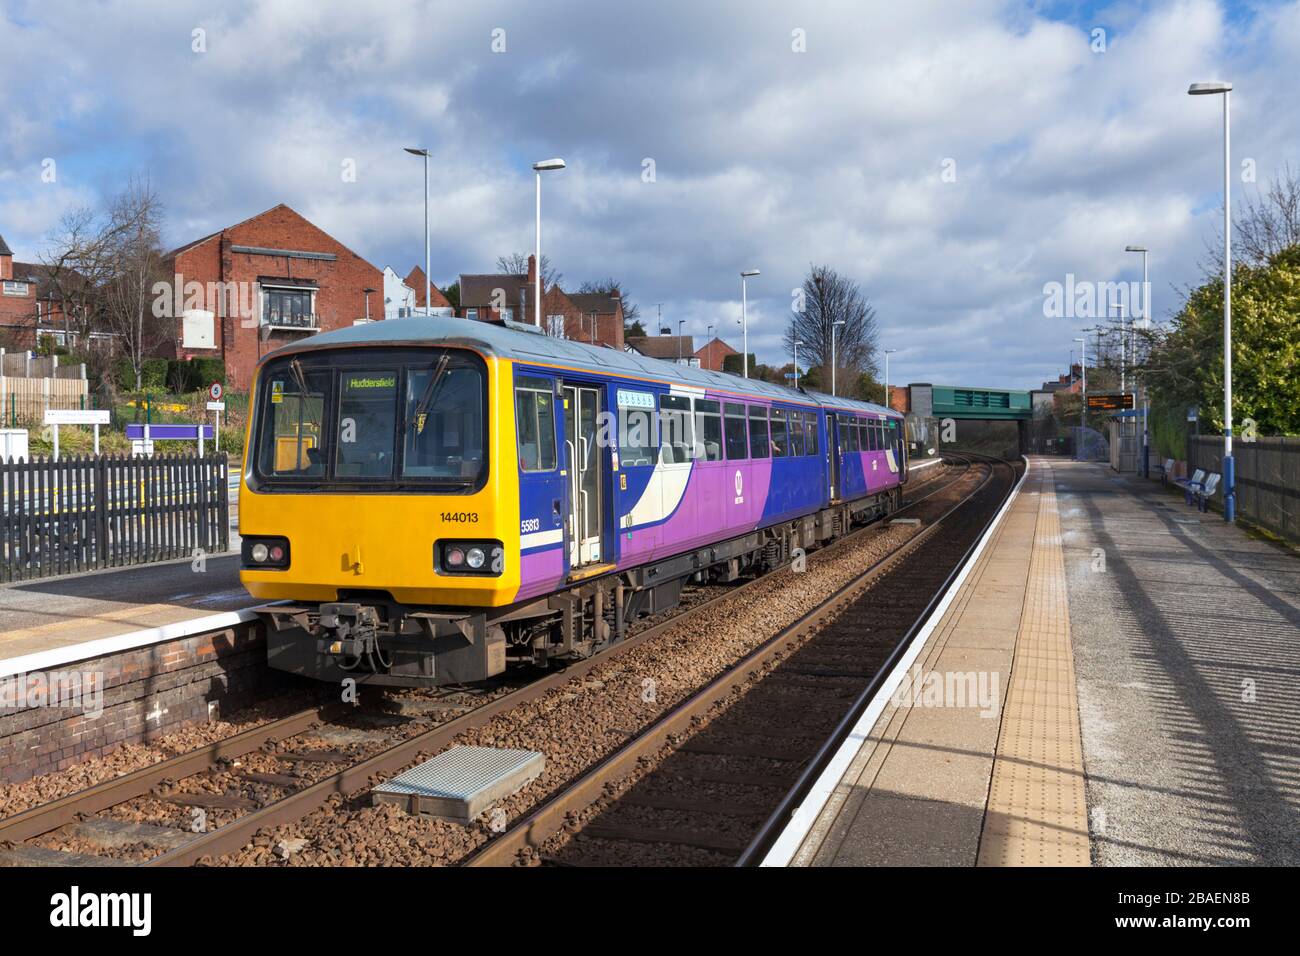 Northern rail class 144 pacer train 144013 at  Elsecar  railway station (south Yorkshire) Stock Photo